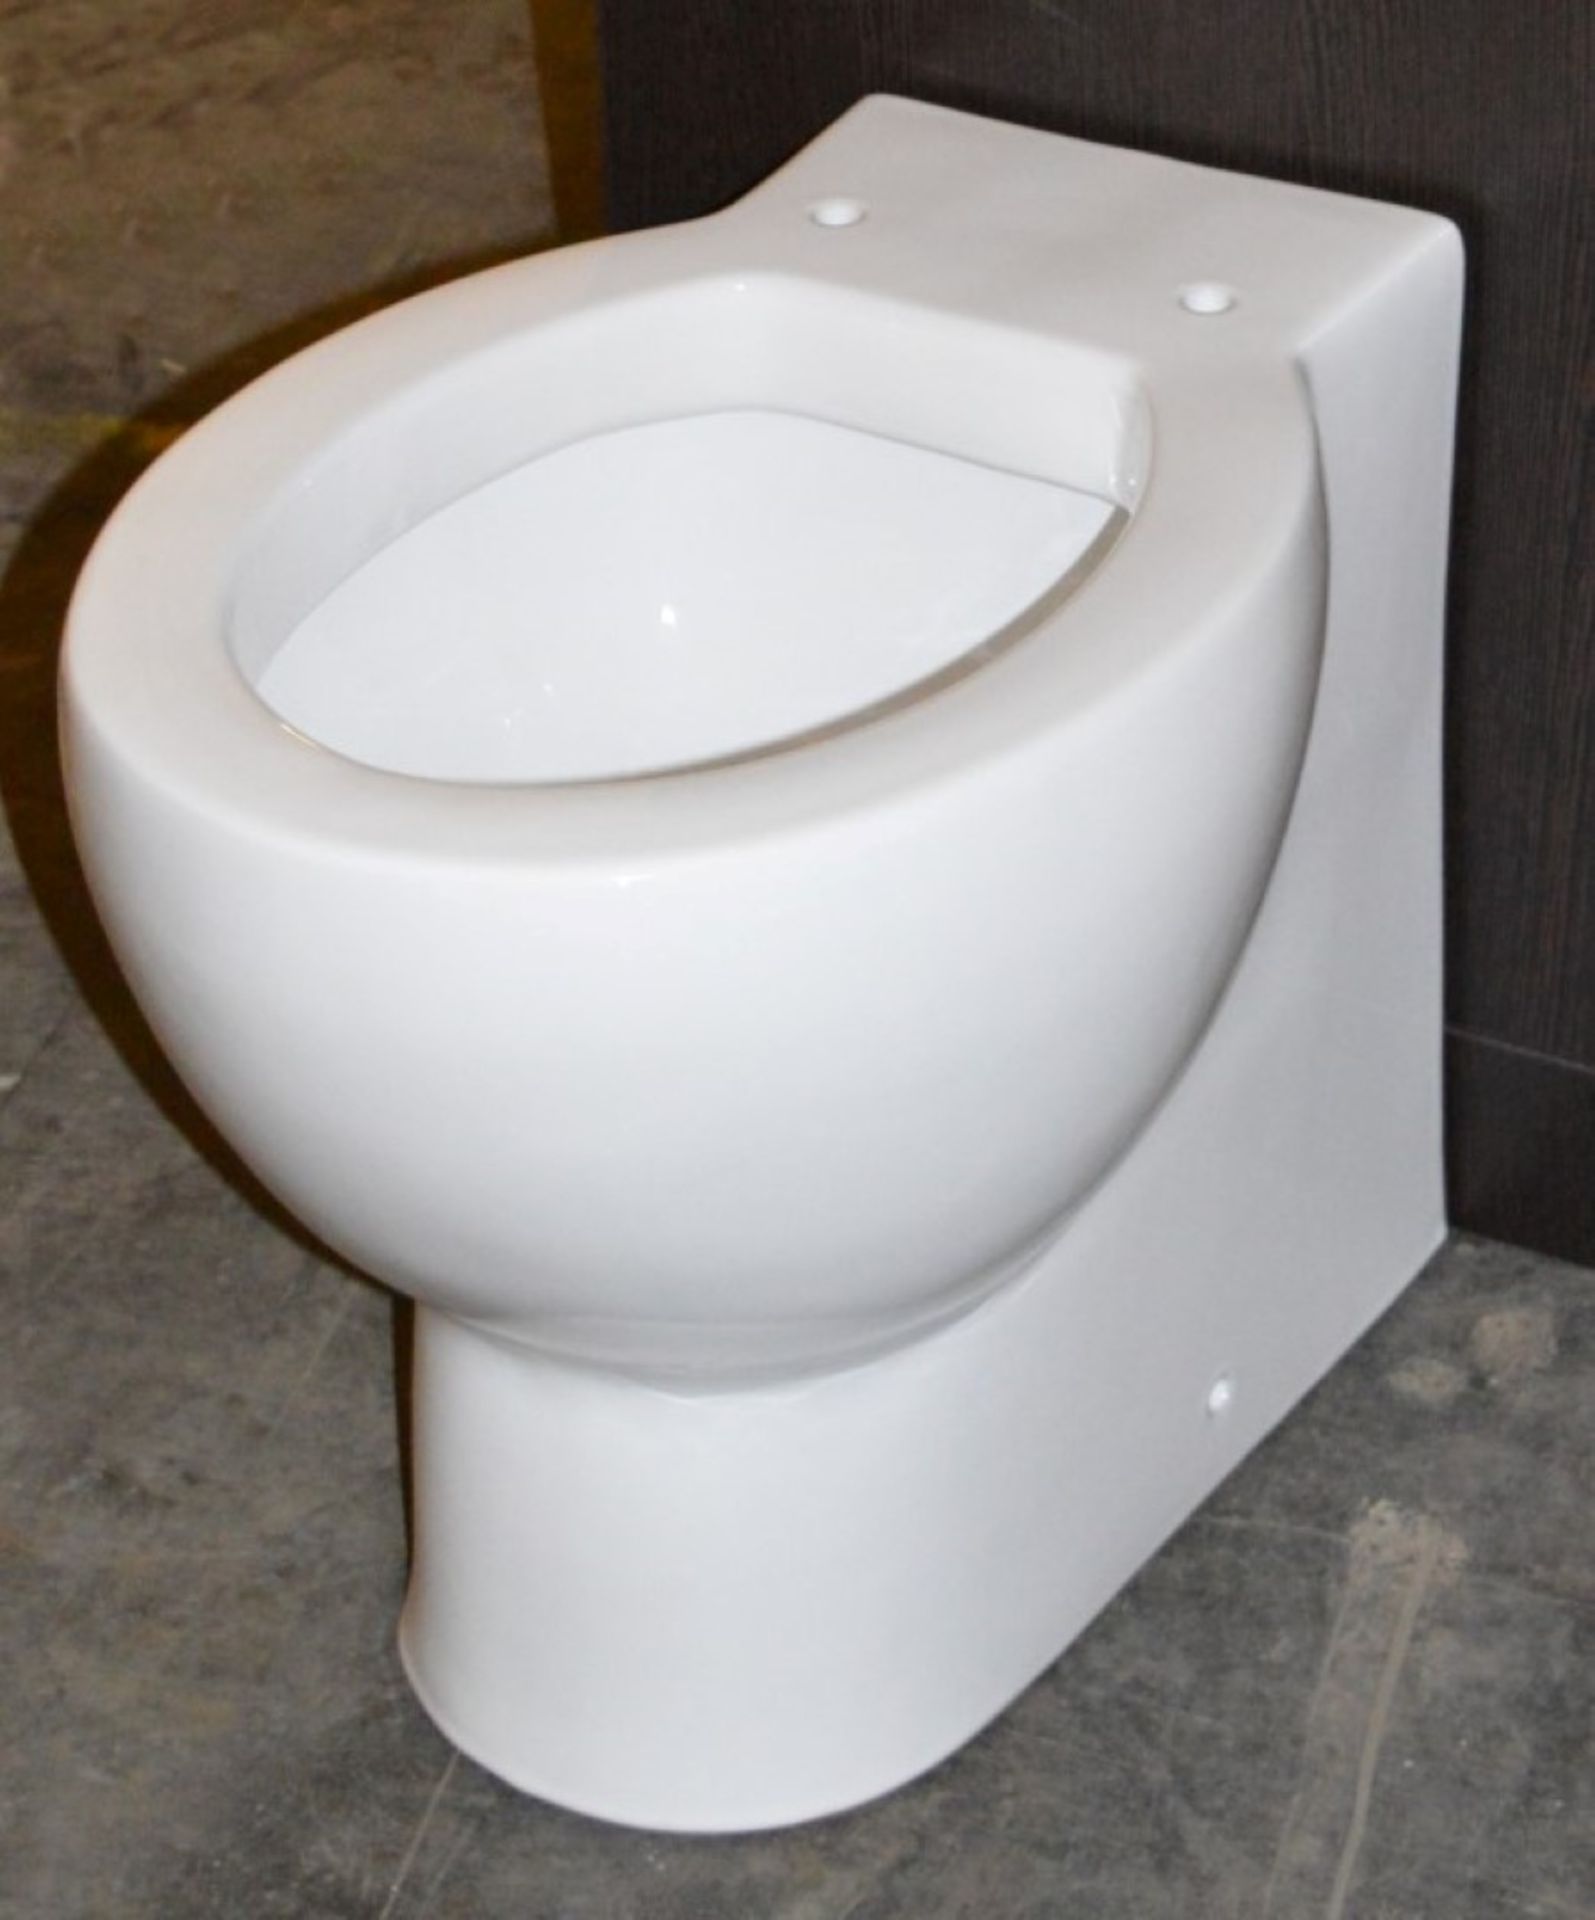 1 x Vogue Arc Back to Wall WC Toilet Pan - Seat Not Included - Vogue Bathrooms - Brand New and Boxed